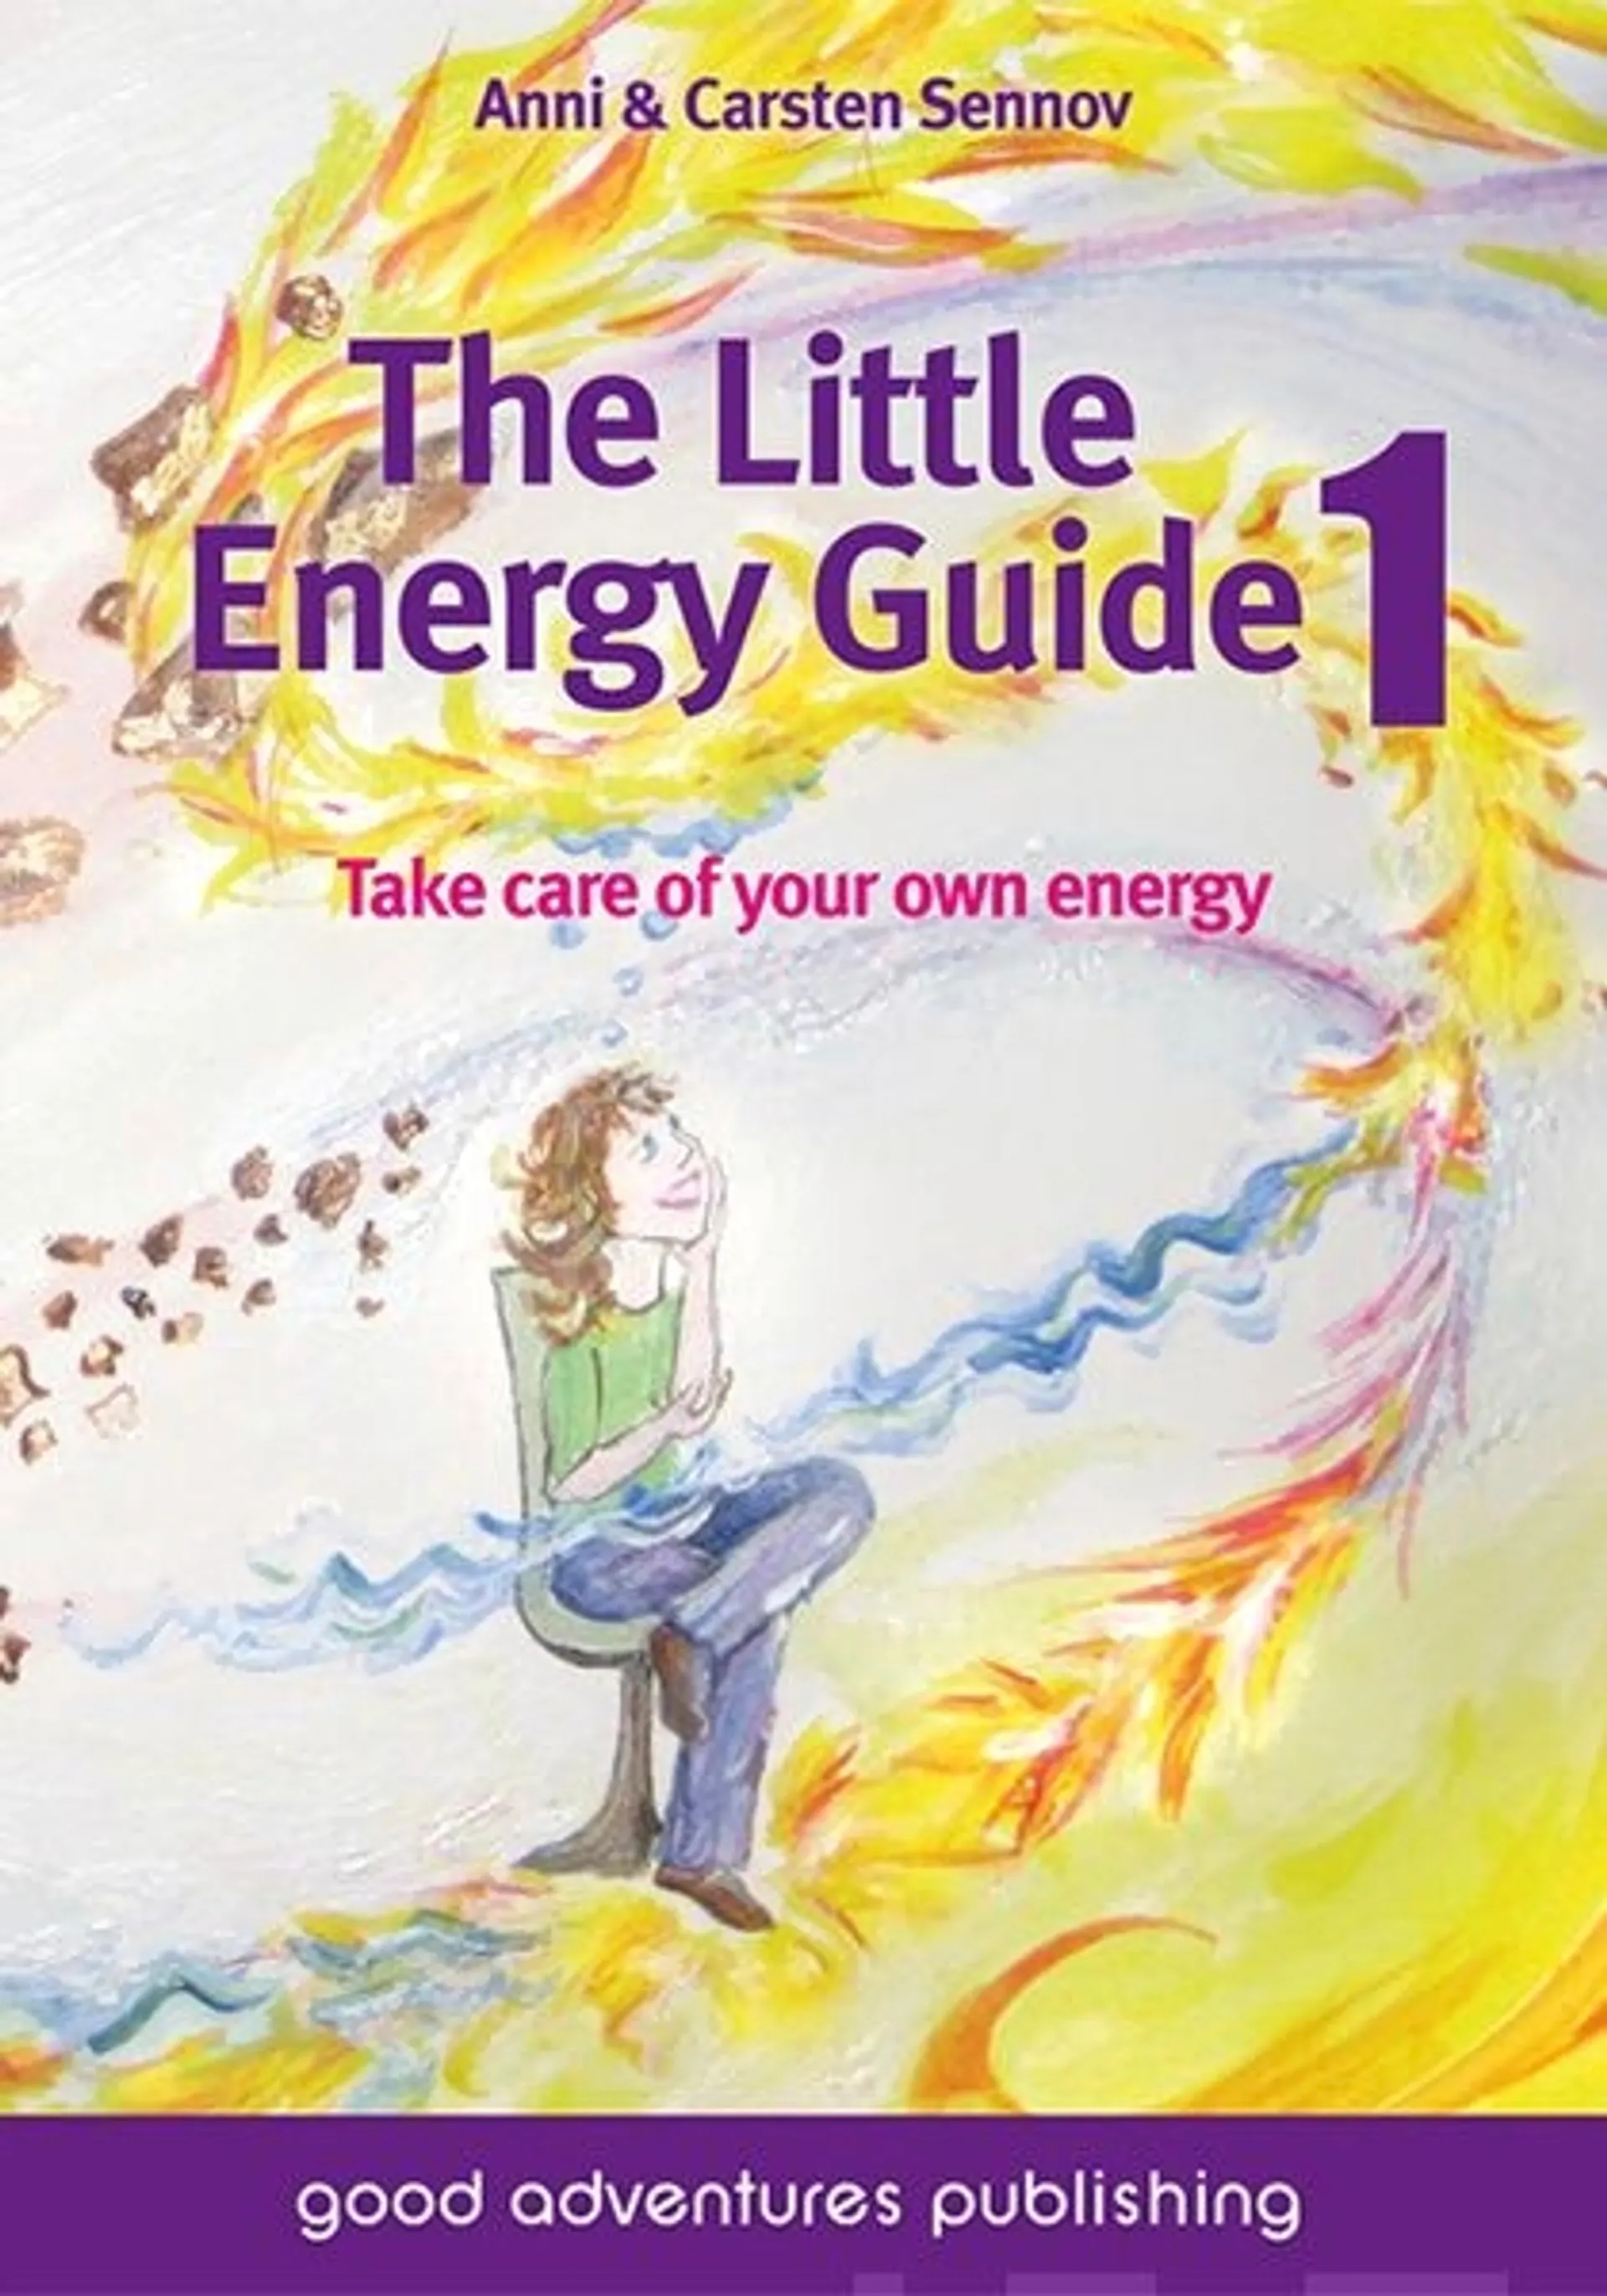 The Little Energy Guide 1